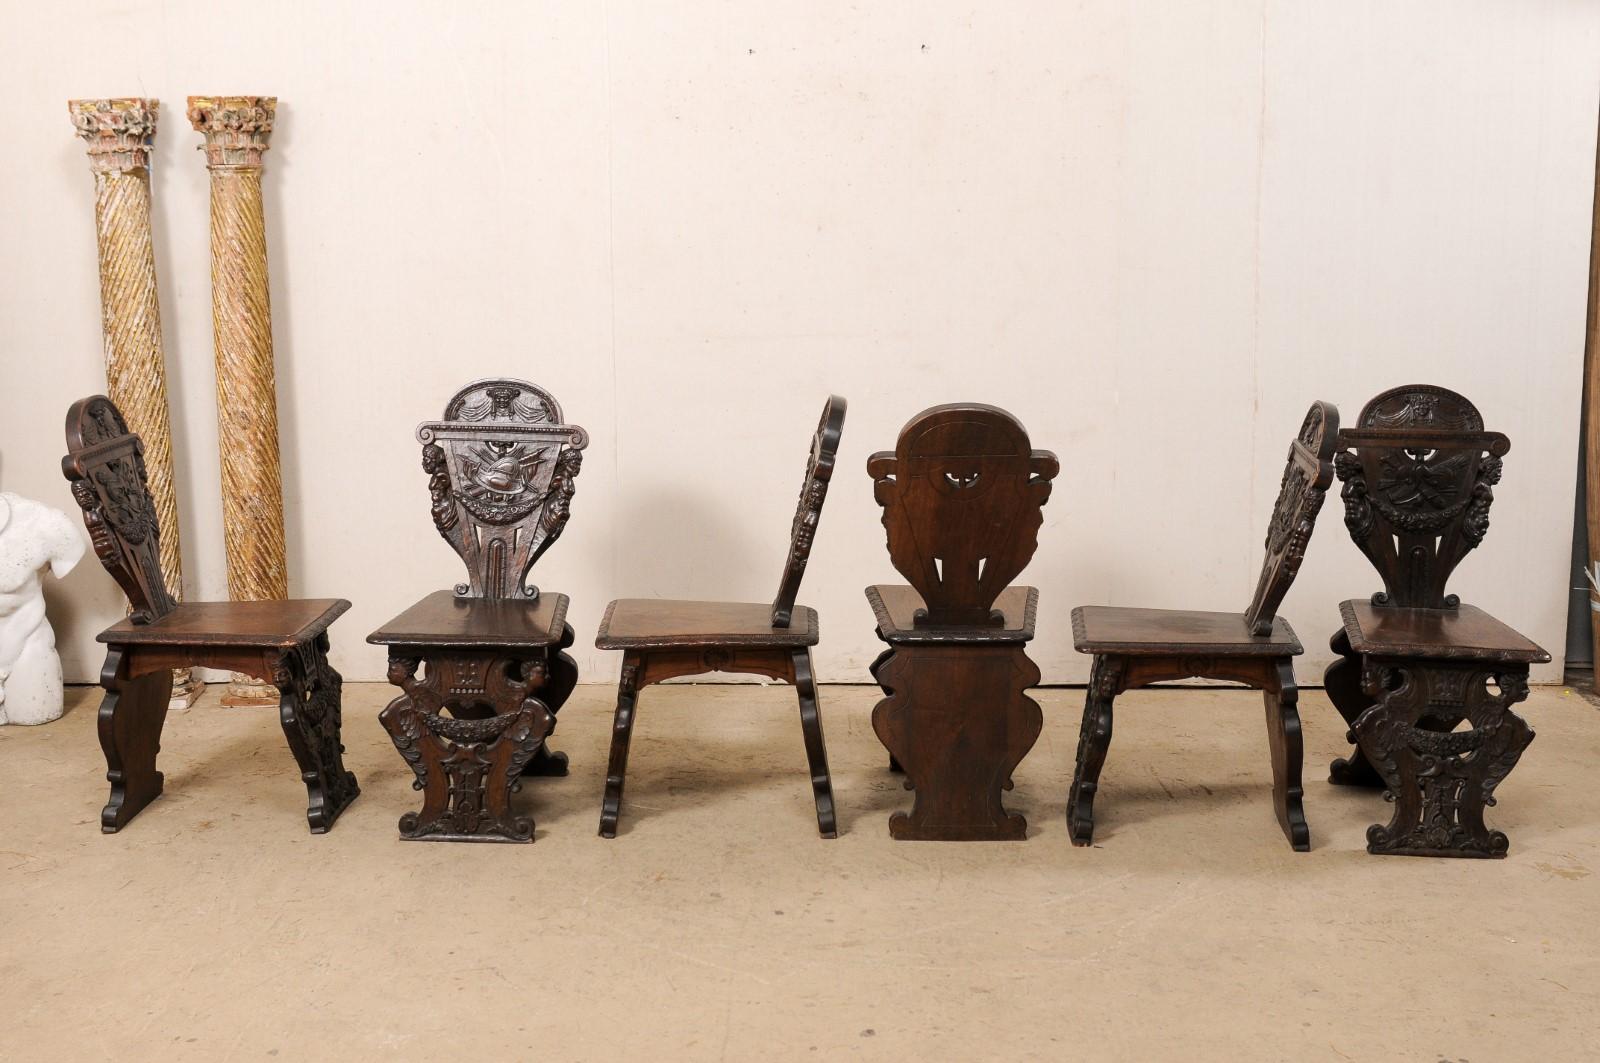 Set of 6 English Renaissance Ornately-Carved Hall Chairs, Turn of 19th & 20th C For Sale 5